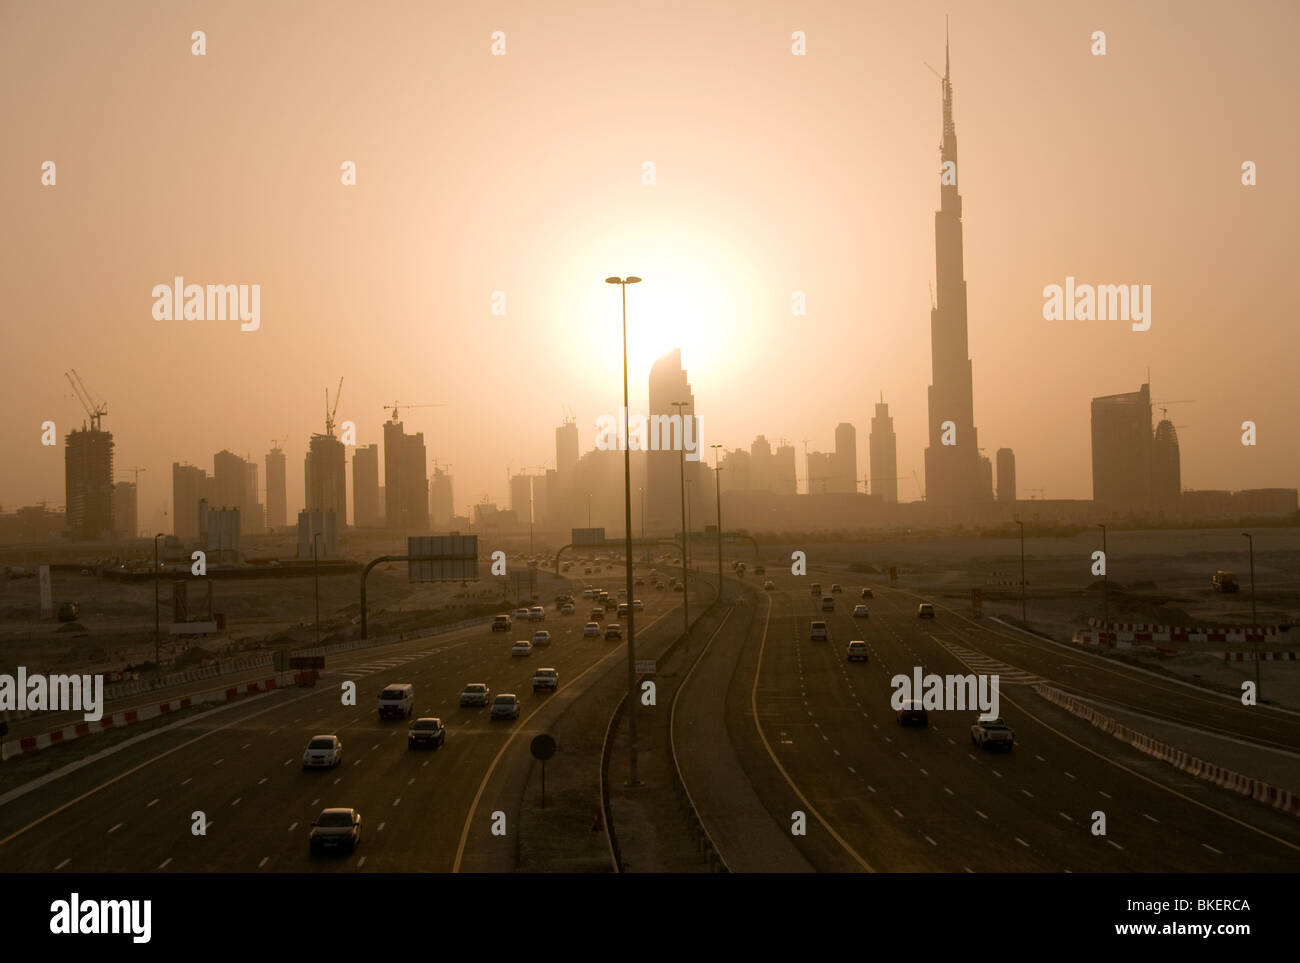 Road leading to Dubai skyline including the worlds tallest building on the right Burj Khalifa Stock Photo